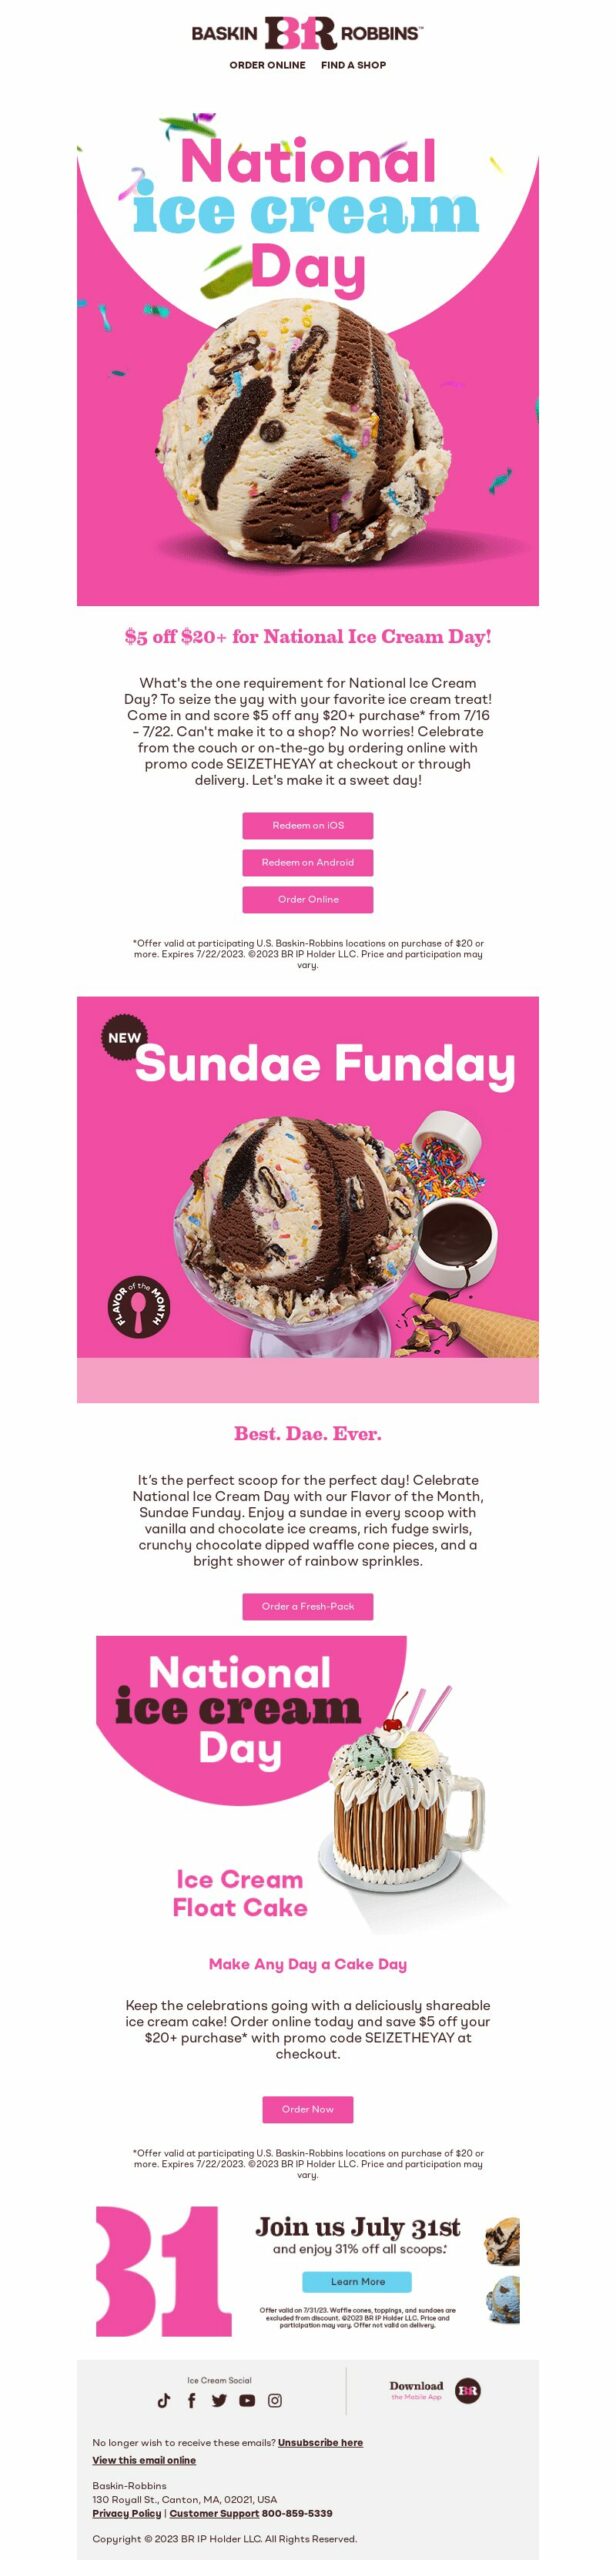 Baskin-Robbins, National Ice Cream Day, email marketing campaign. 